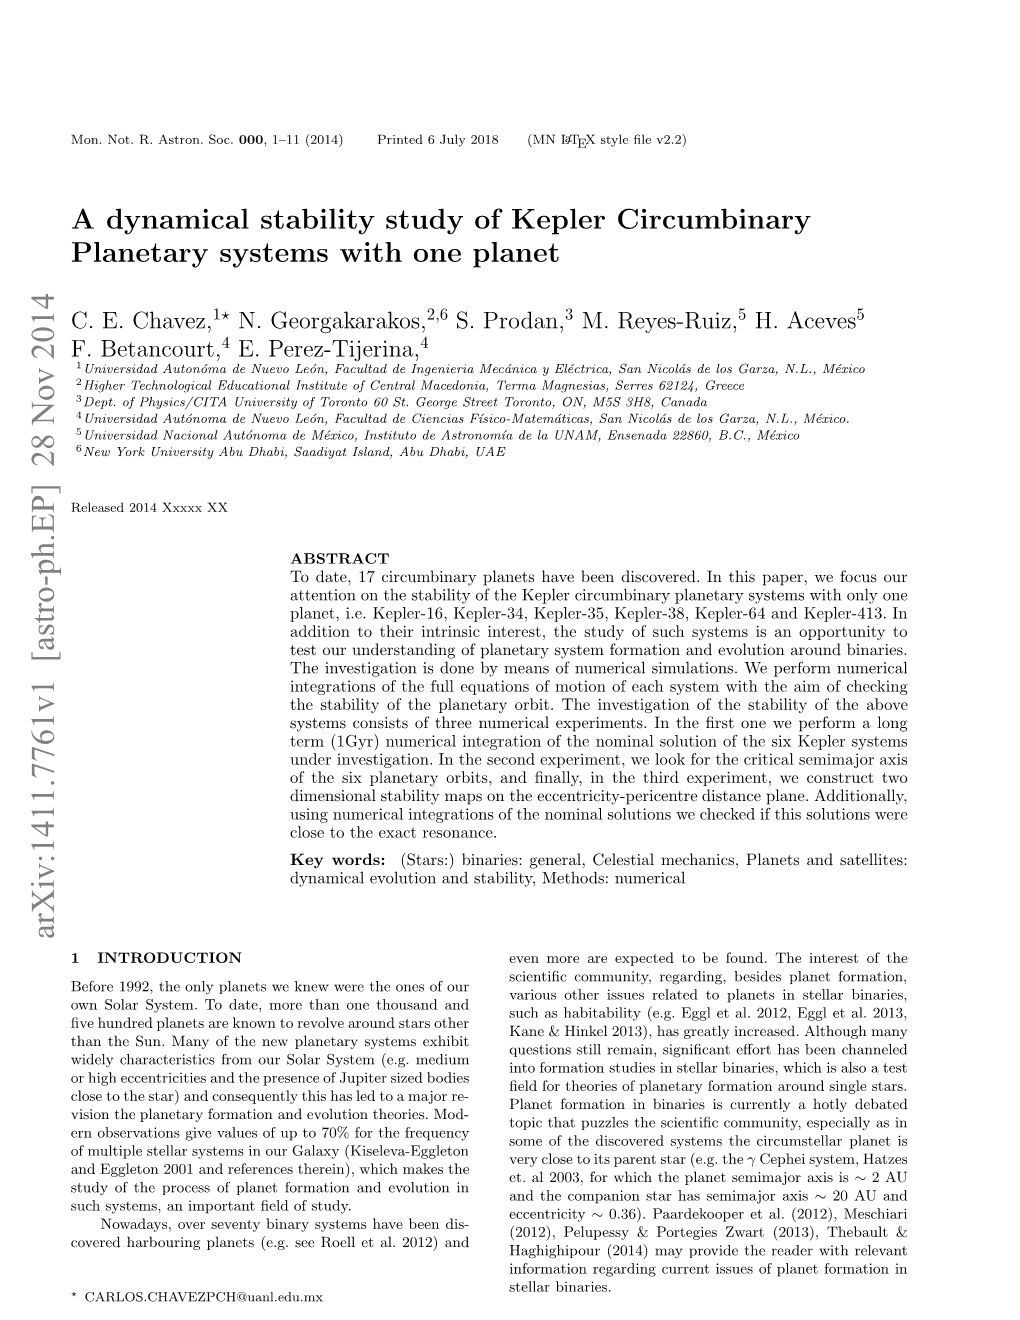 A Dynamical Stability Study of Kepler Circumbinary Planetary Systems with One Planet 3 on the Outcome (E.G